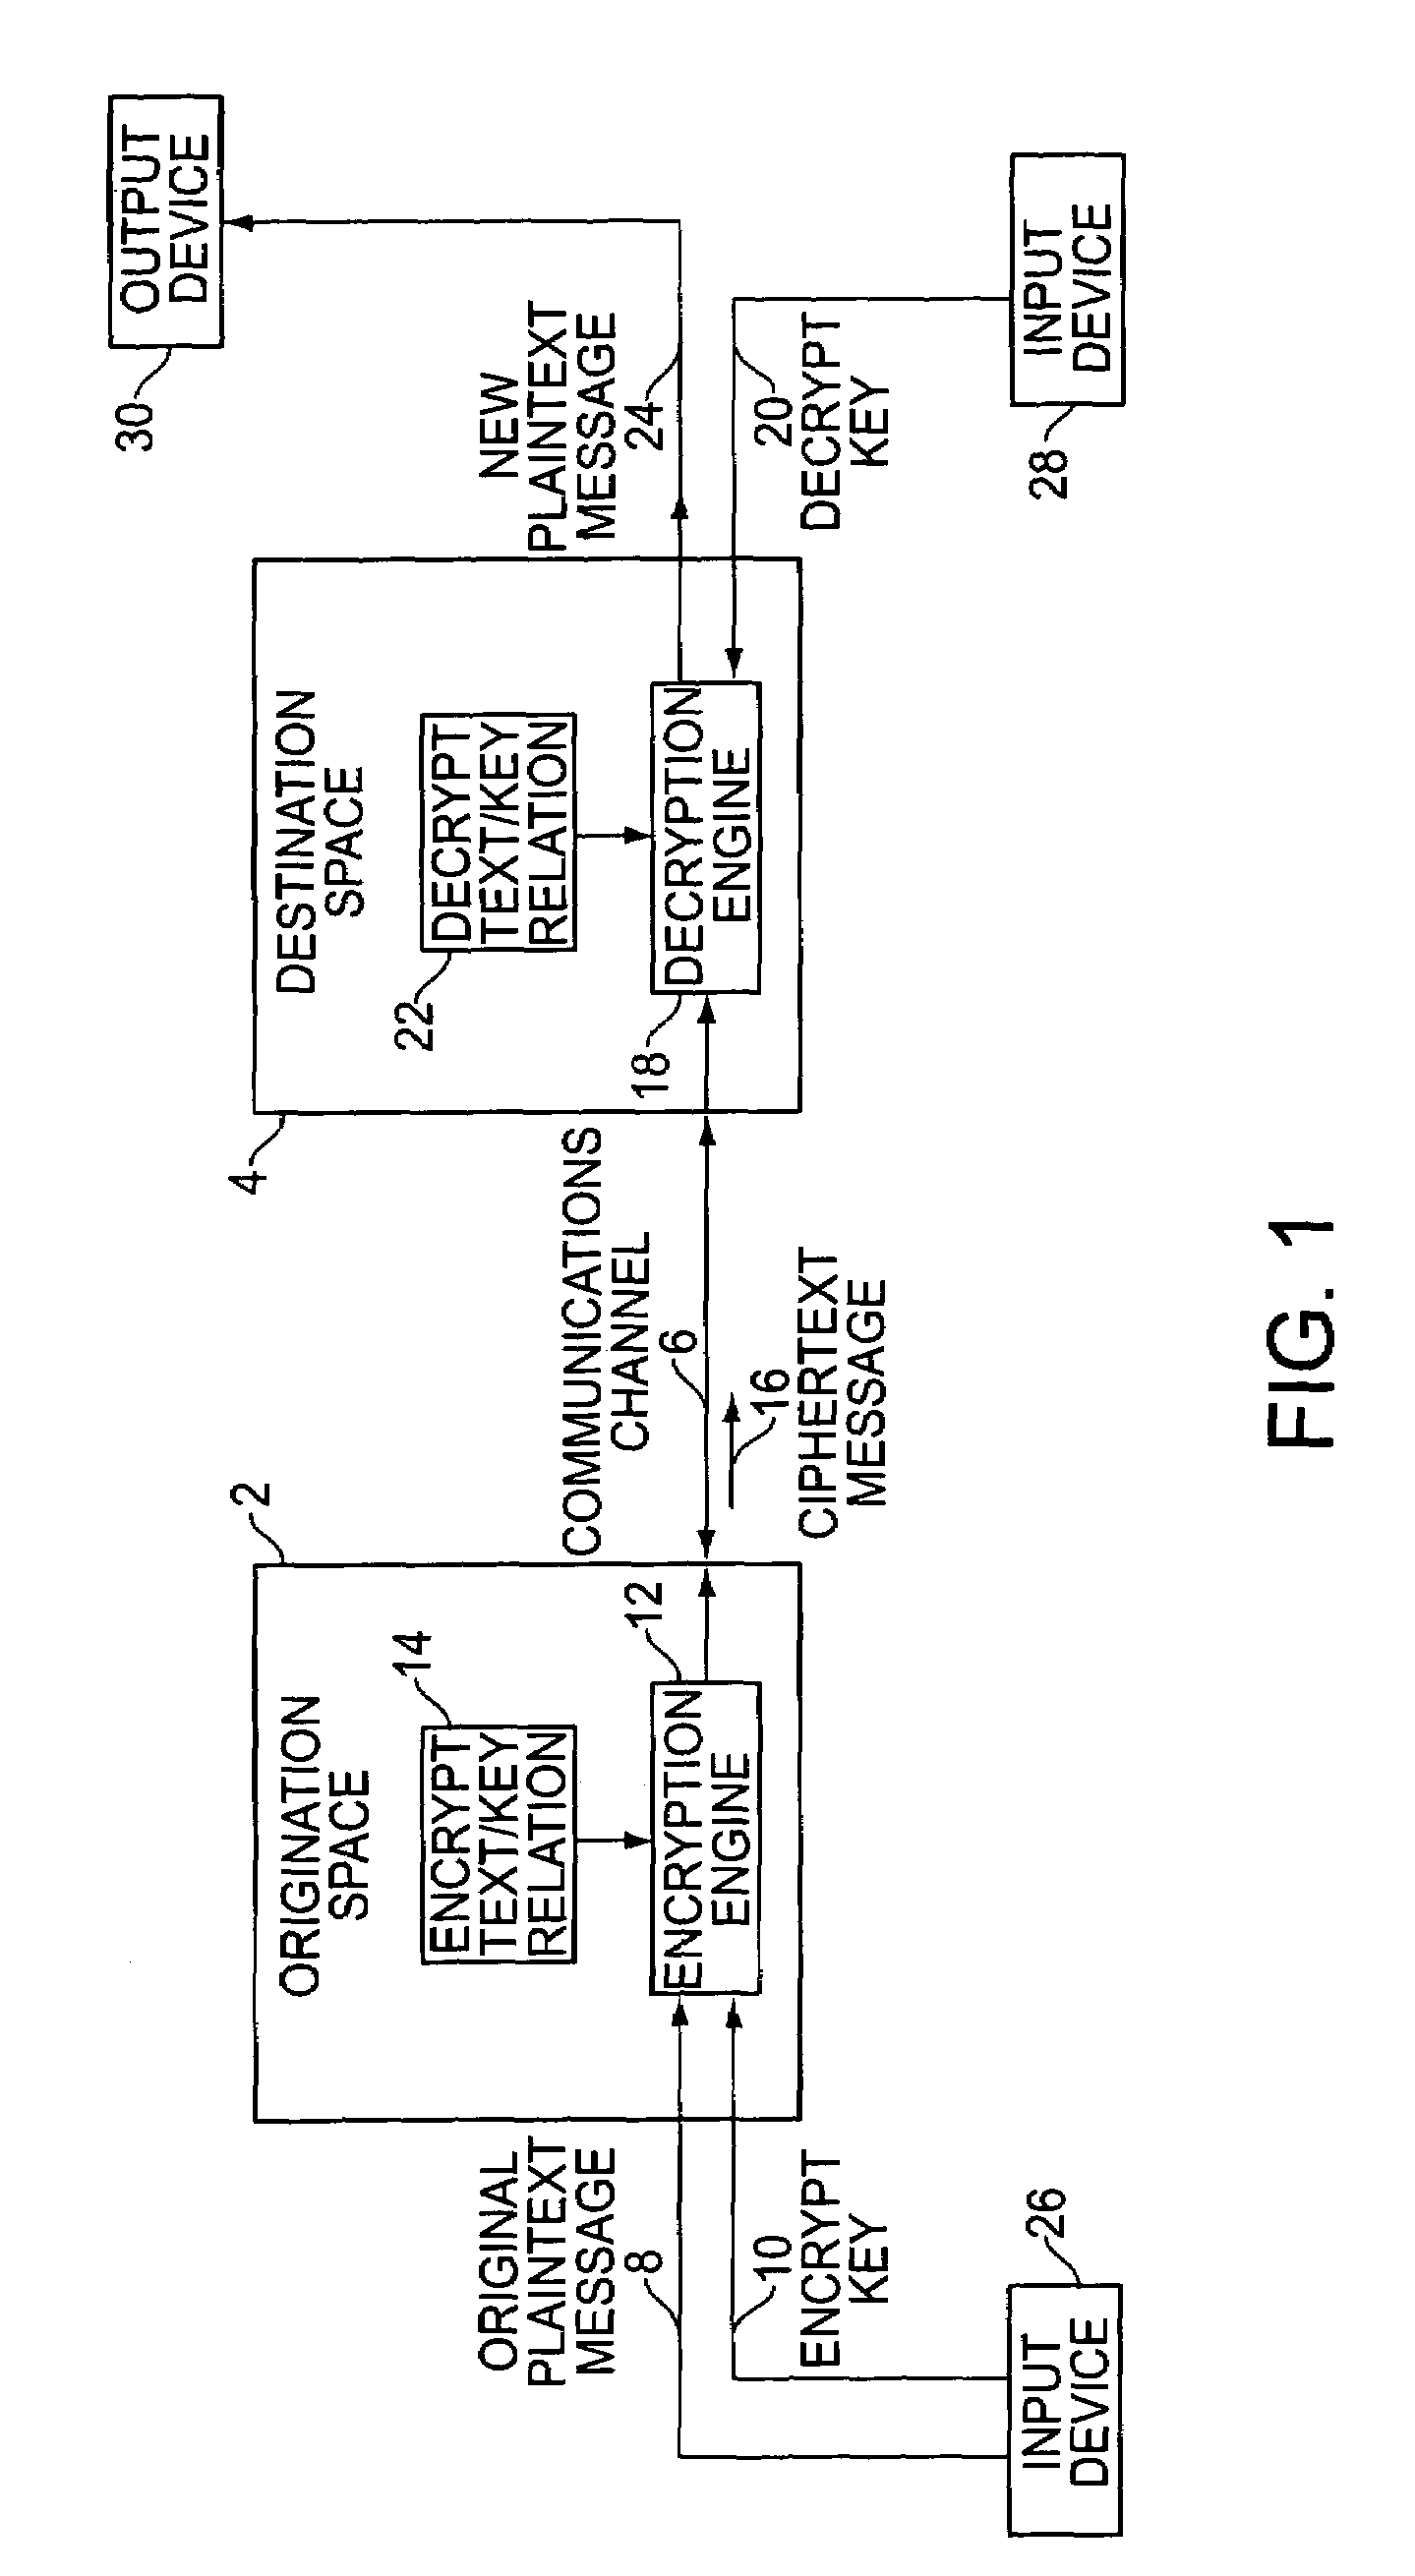 Cryptographic key split binding process and apparatus